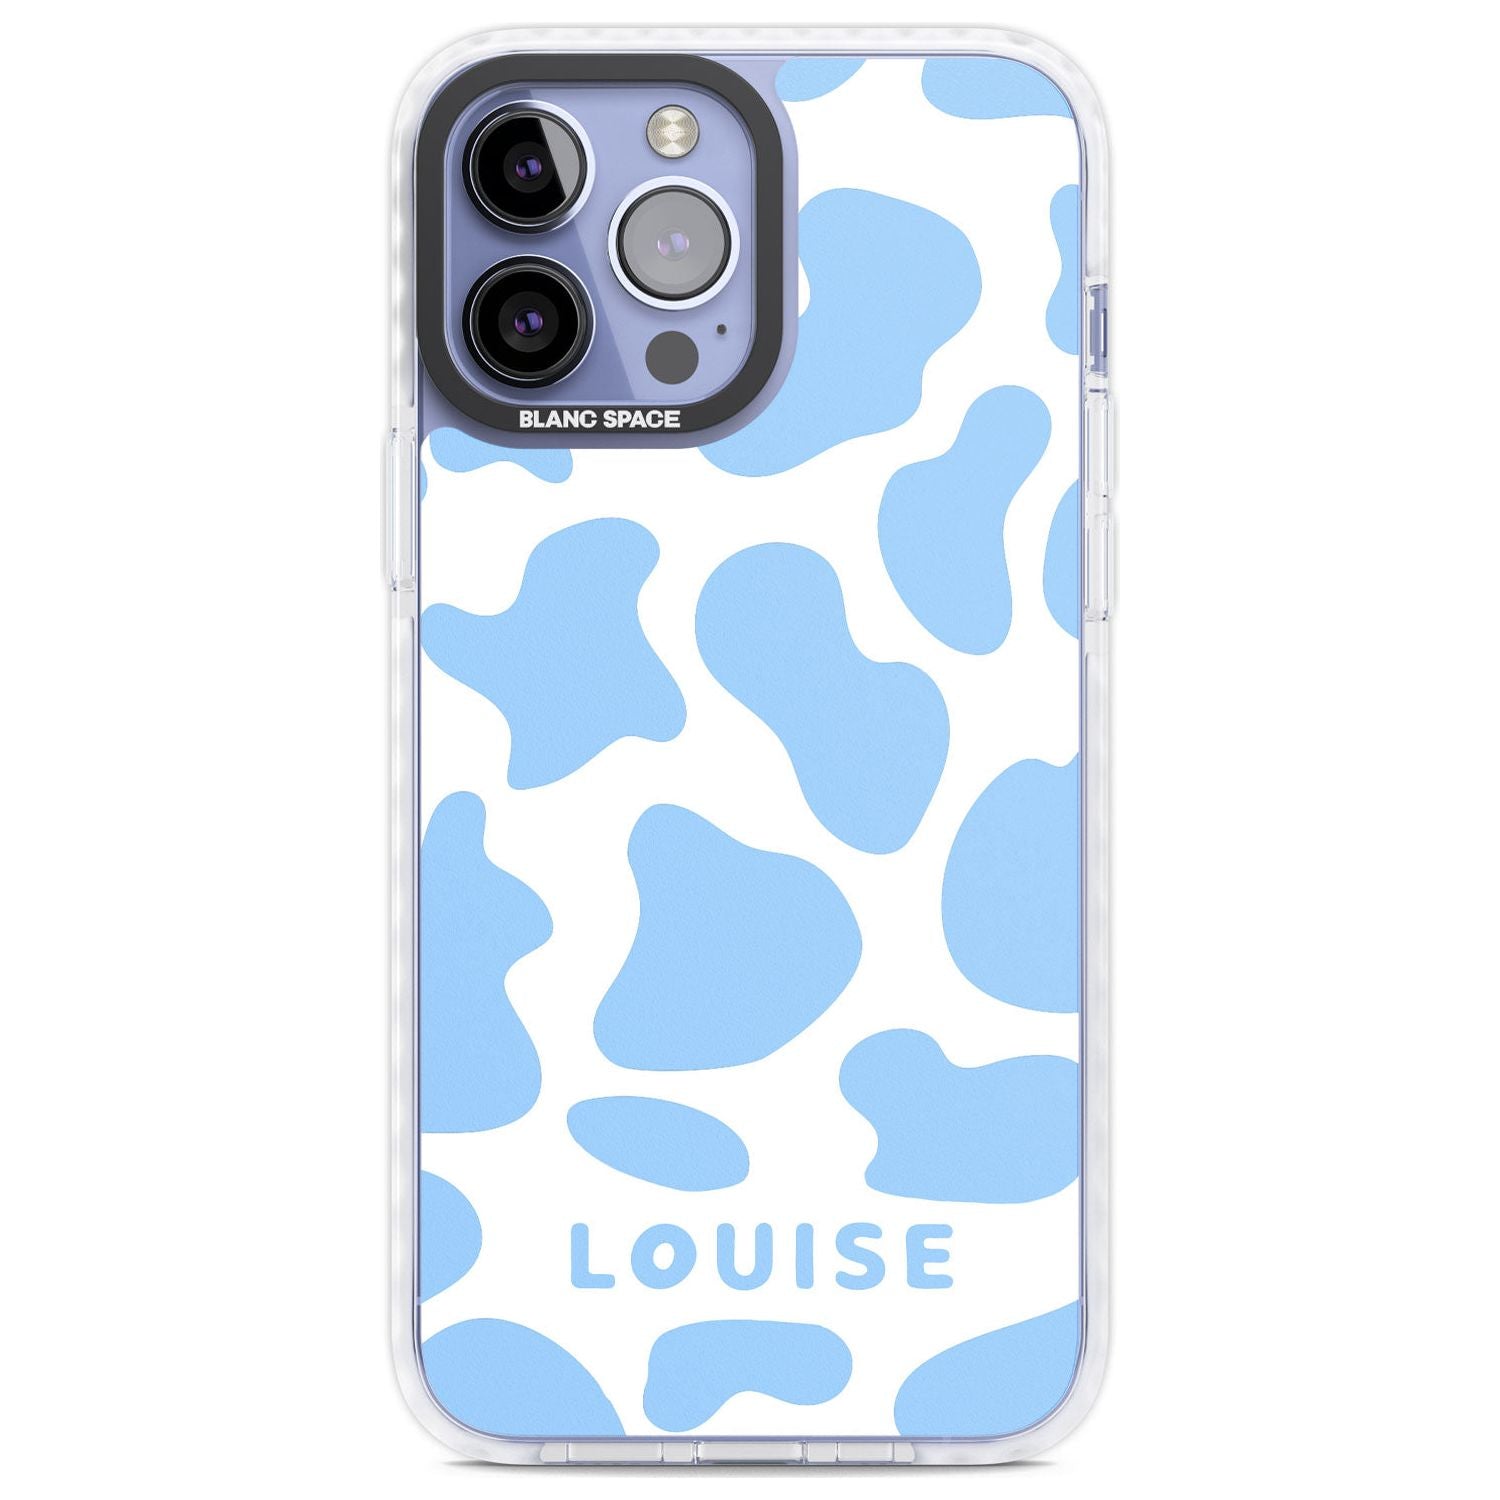 Personalised Blue and White Cow Print Custom Phone Case iPhone 13 Pro Max / Impact Case,iPhone 14 Pro Max / Impact Case Blanc Space